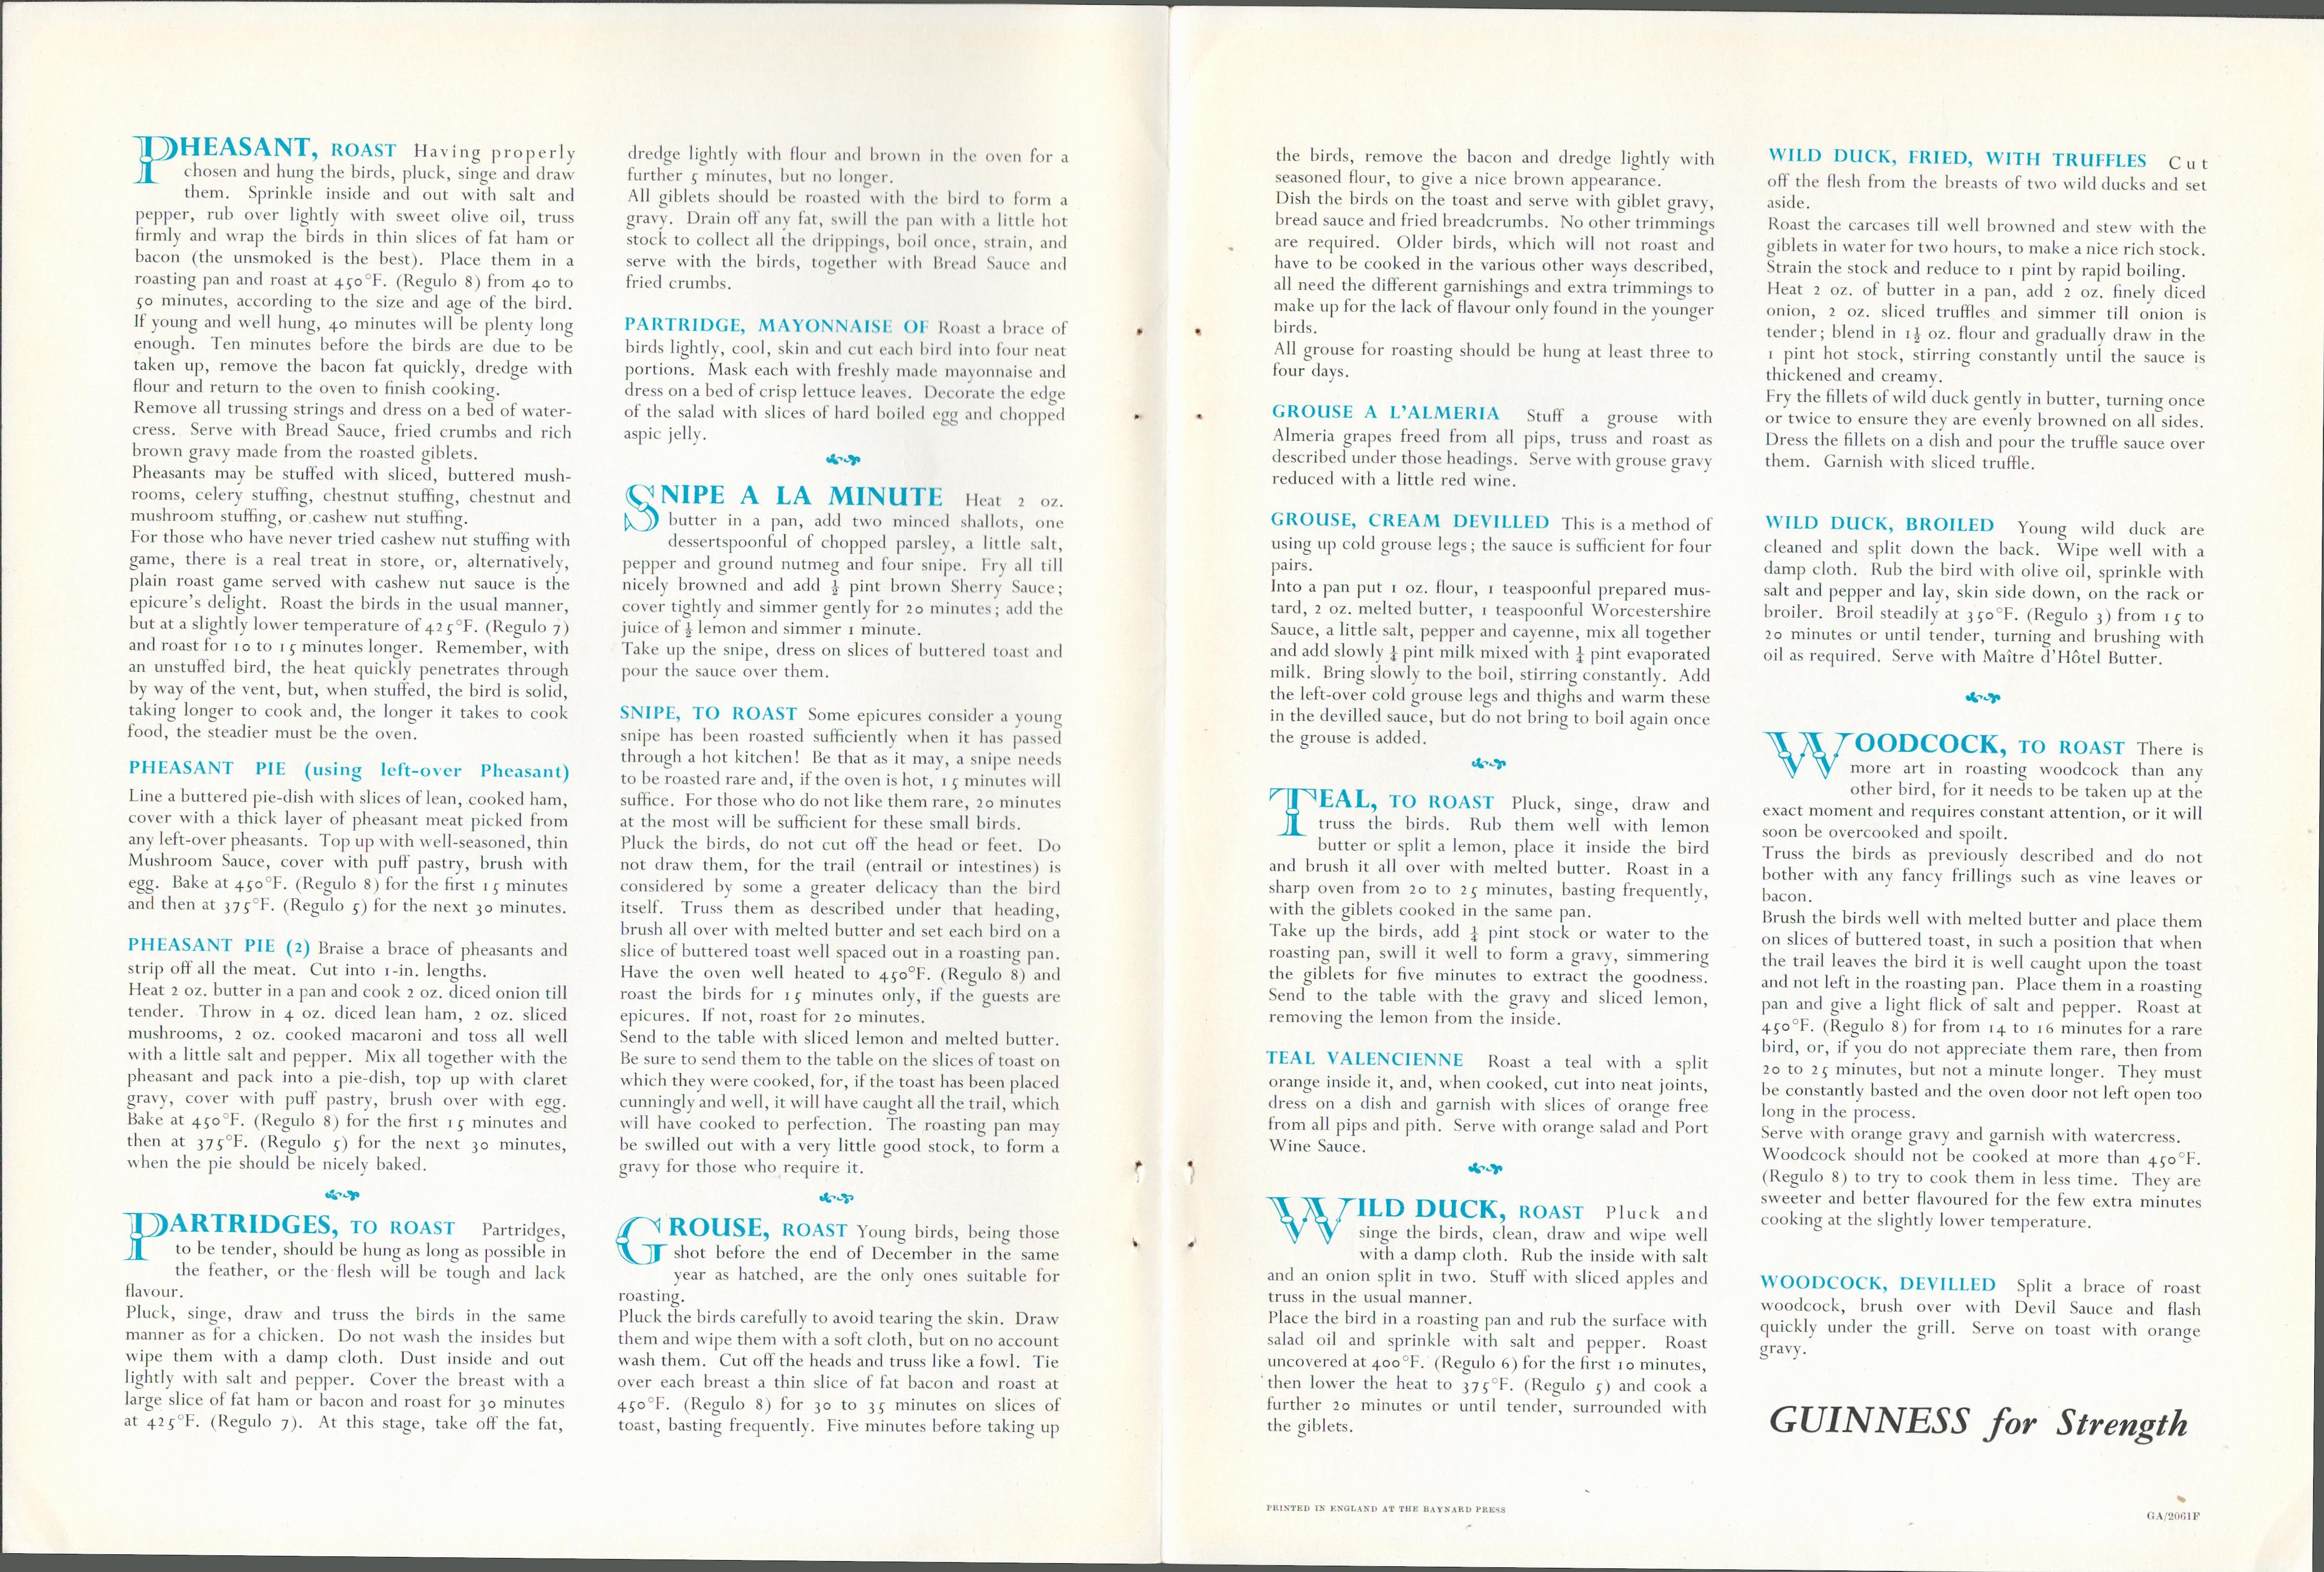 Double Sided Vintage 1961 Guinness Print 'Game Bird Recipes"Double Sided 1961 Guinness Advertisement - Image 2 of 2